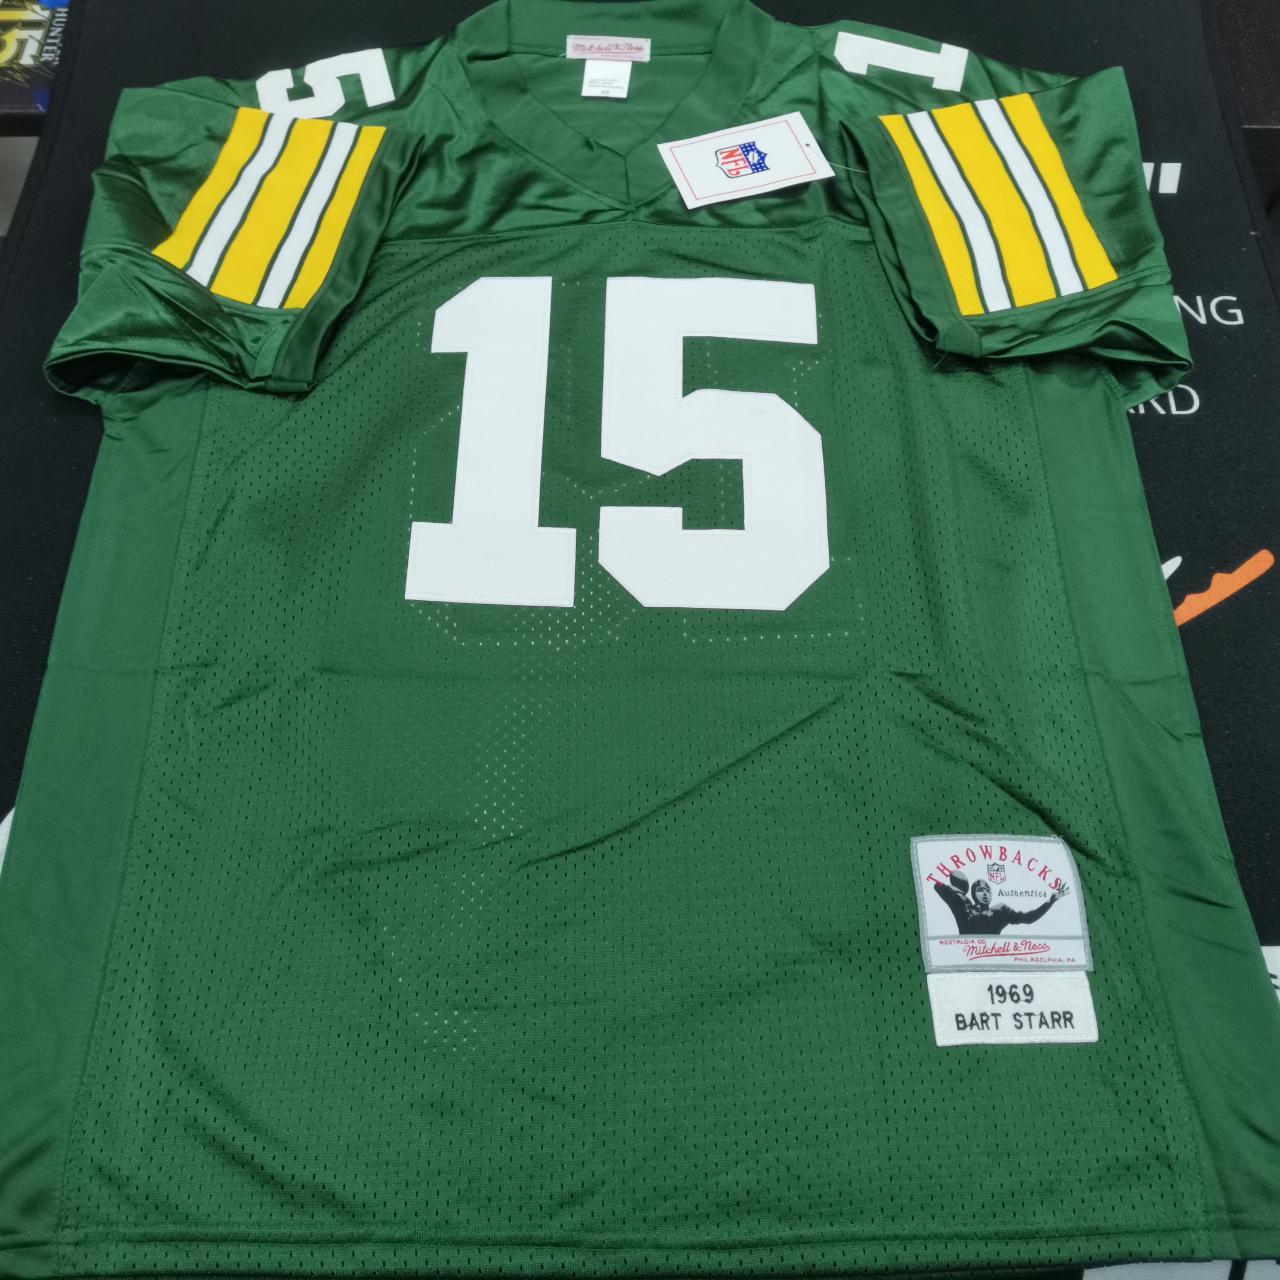 bart starr mitchell and ness jersey